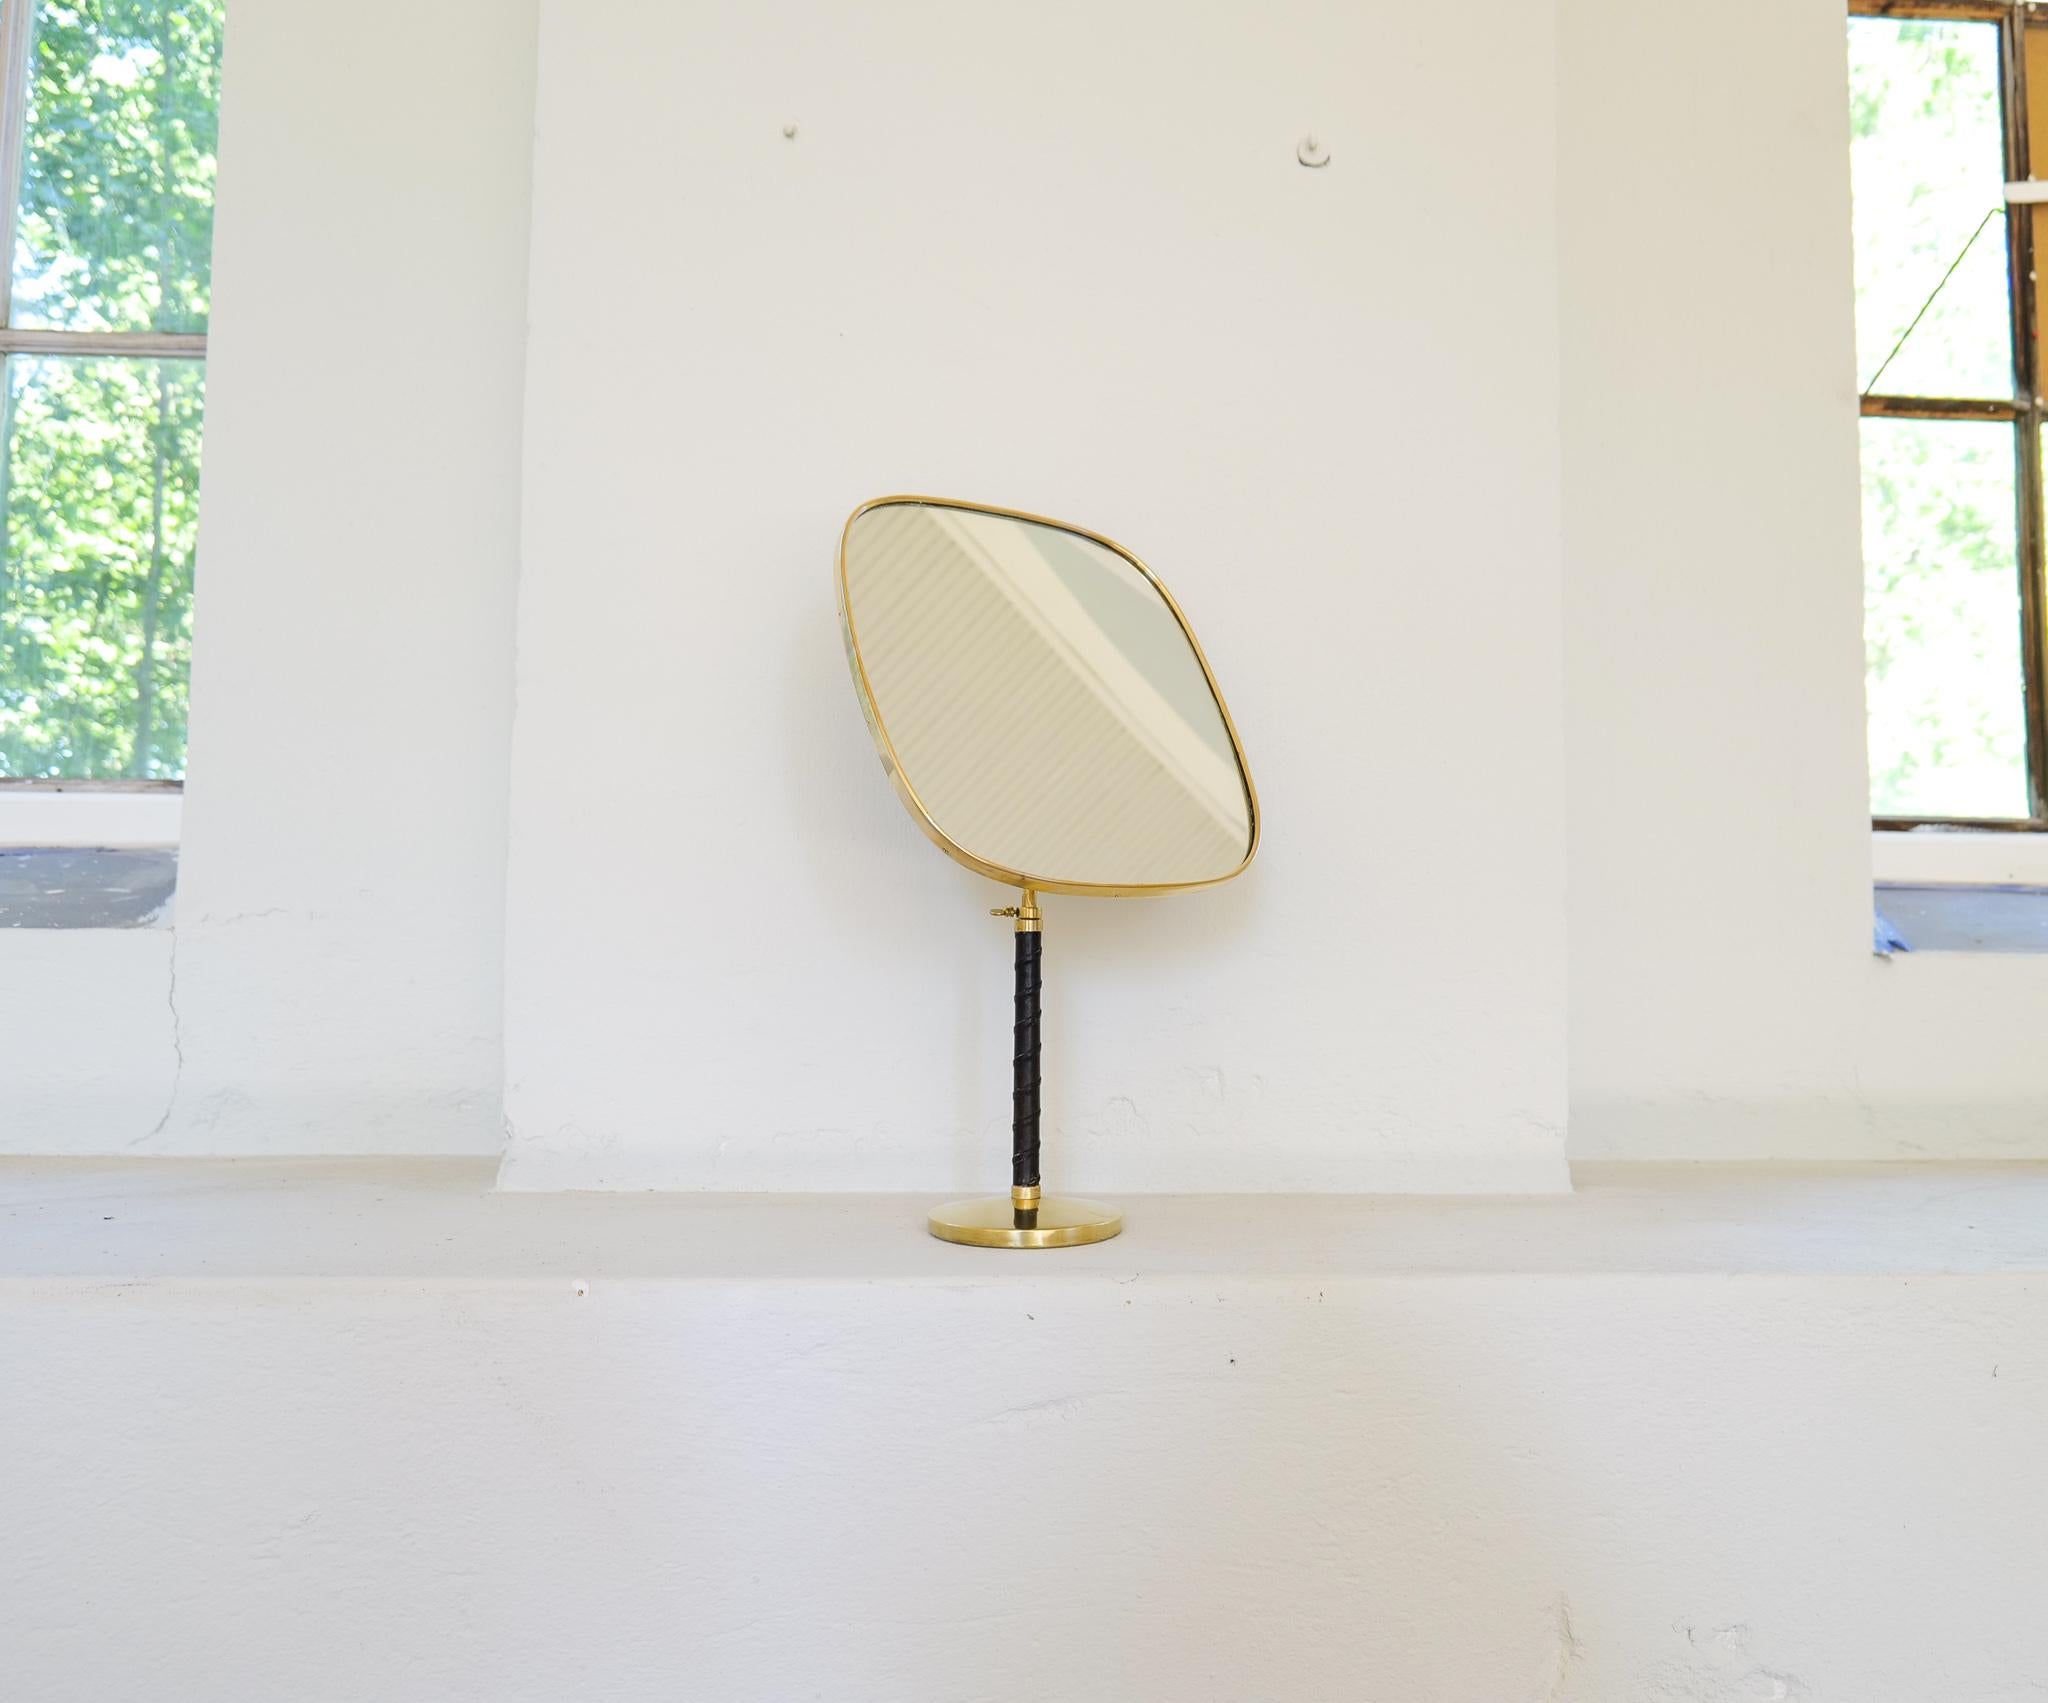 This Large and sculpture table mirror was designed by David Rosén for high-end department stores Nordiska Kompaniet. 
The mirror has very generous proportions and adjustable height that can vary from 48cm to 64 cm. 
Brass and leather details